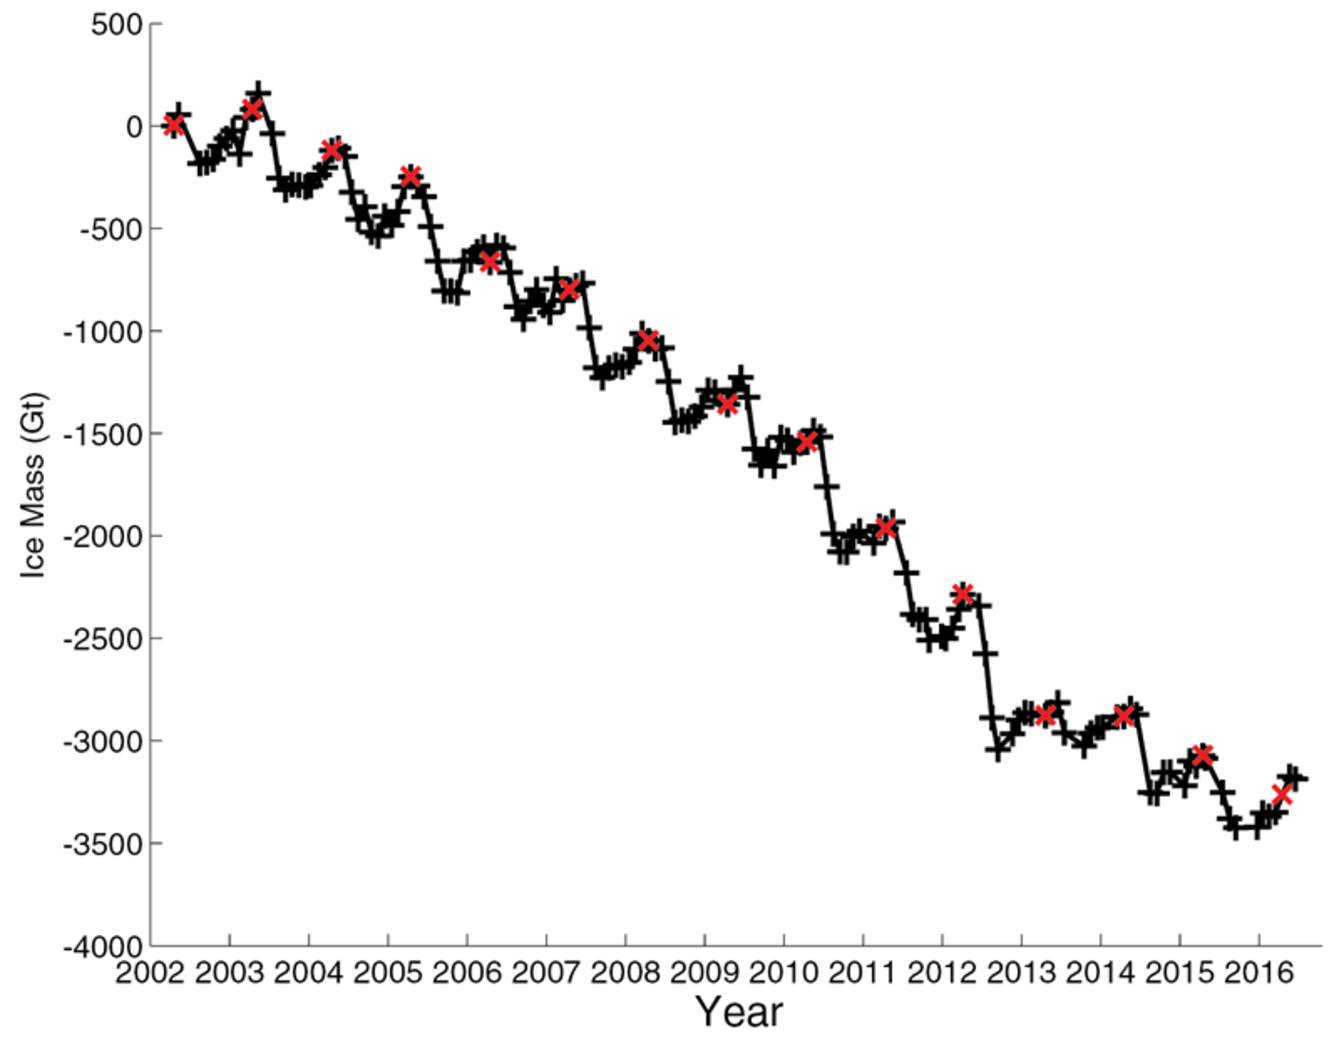 Change in total mass of the Greenland Ice Sheet (in Gt) from 2002 to 2016. Red crosses indicate the values every April